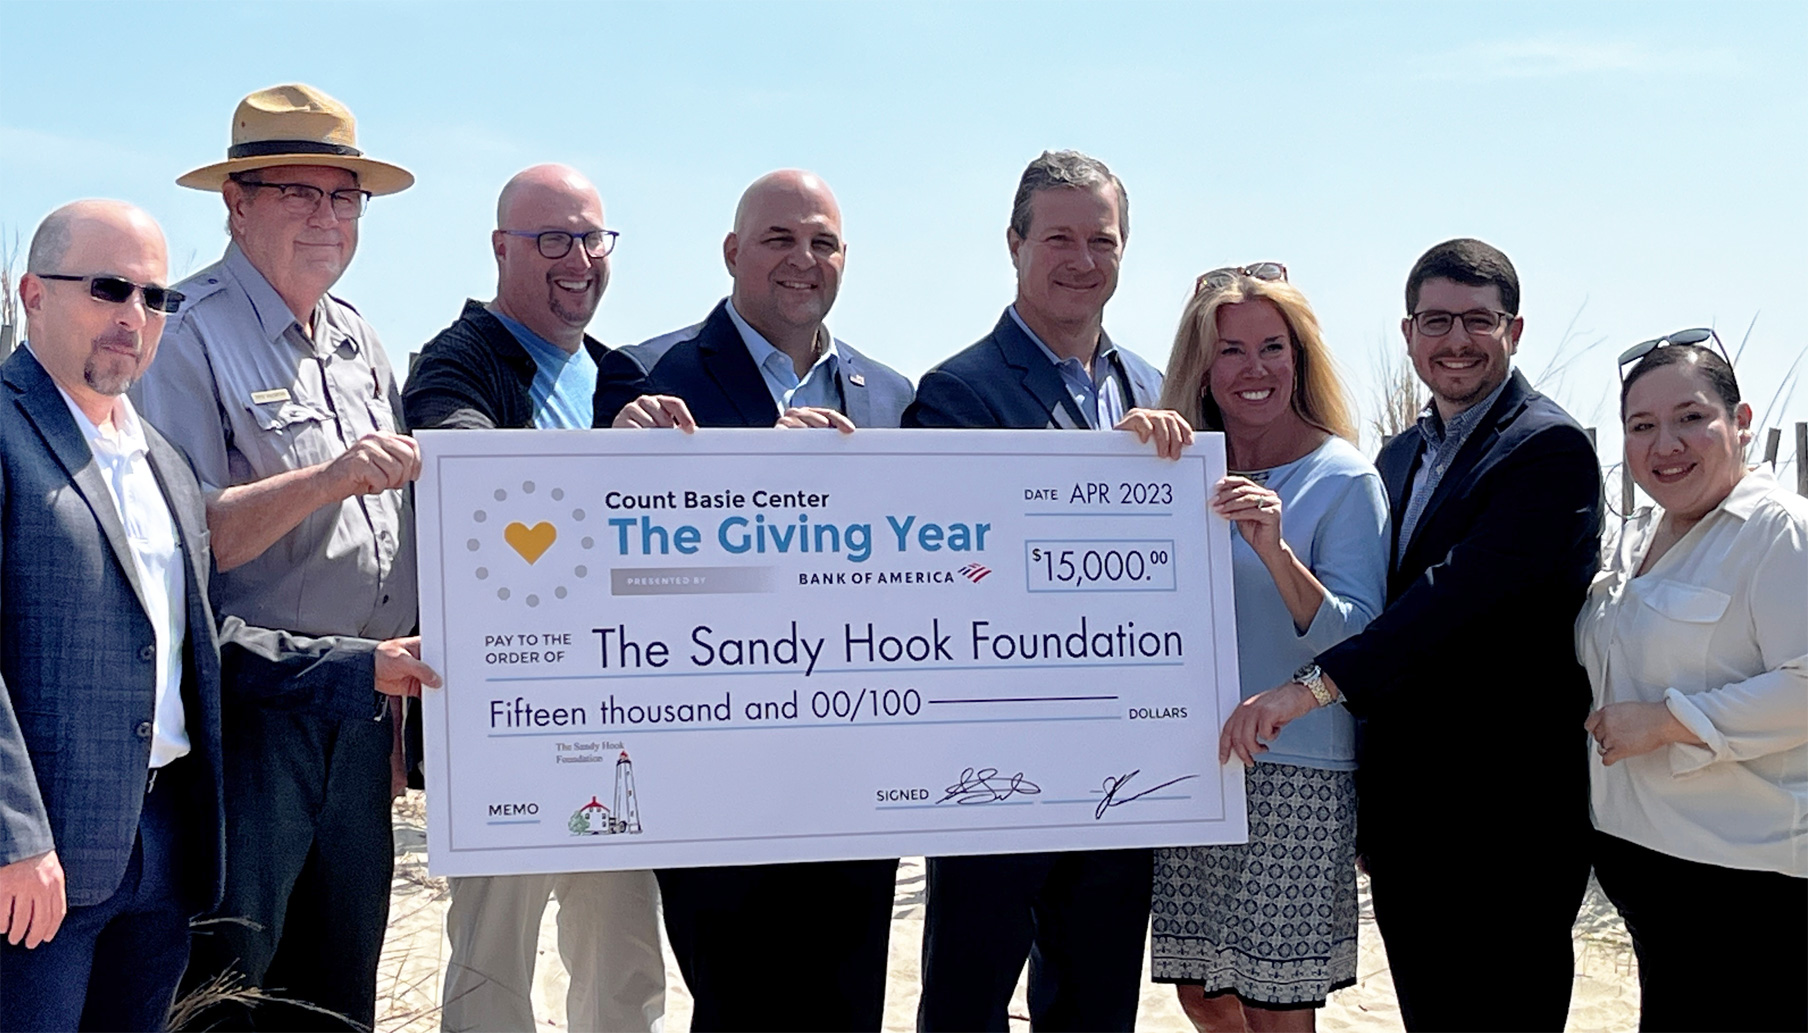 Count Basie Center and Bank of America officials present The Sandy Hook Foundation with a $15,000 check as part of THE GIVING YEAR initiative